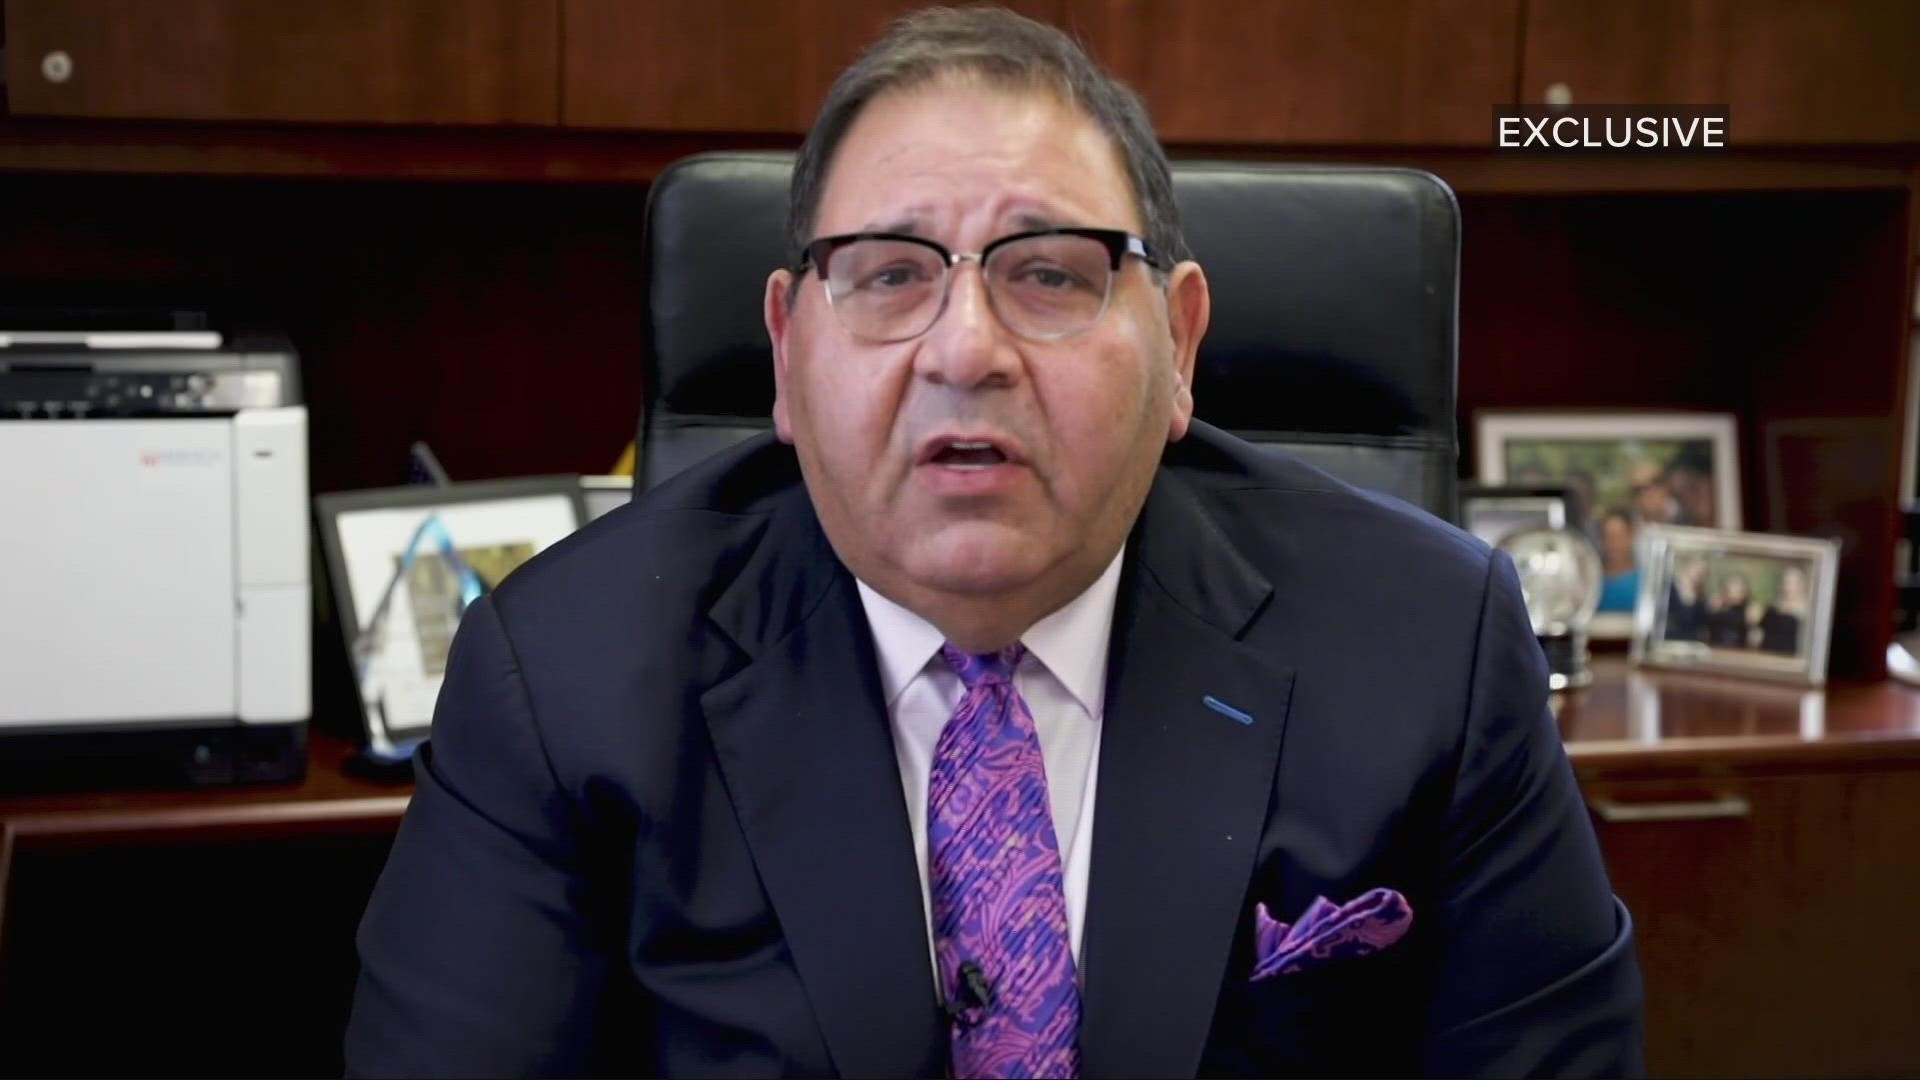 The hospital's board of trustees claims Boutros failed to disclose more than $1.9 million in bonuses he gave to himself over a four-year period.